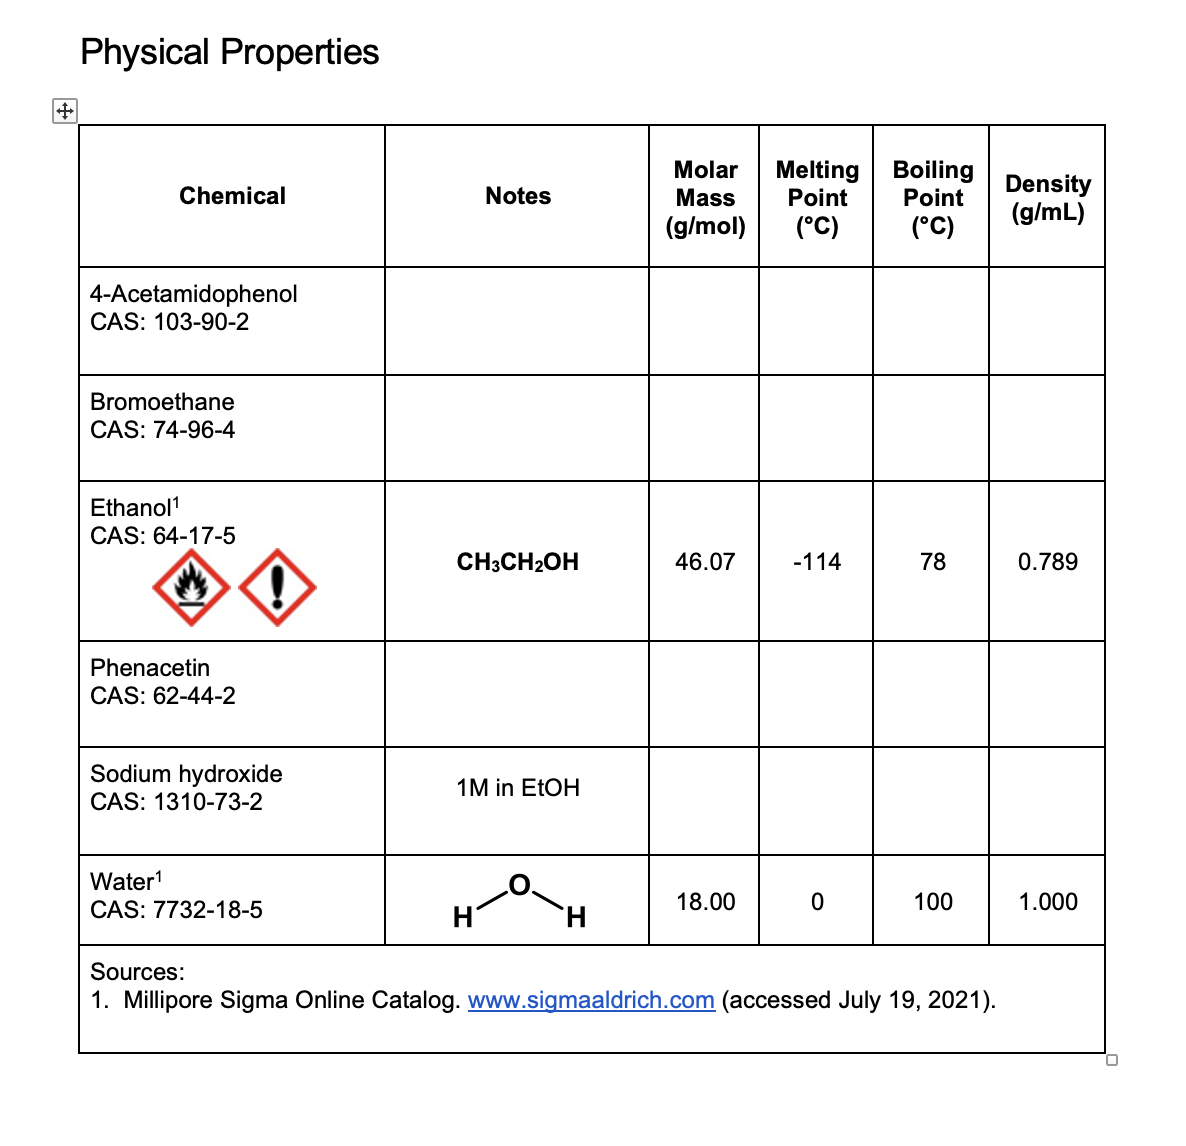 Physical Properties
Molar
Mass
Melting Boiling
Point
Point
Density
(g/mL)
Chemical
Notes
(g/mol)
(°C)
(°C)
4-Acetamidophenol
CAS: 103-90-2
Bromoethane
CAS: 74-96-4
Ethanol
CAS: 64-17-5
CH;CH2OH
46.07
-114
78
0.789
Phenacetin
CAS: 62-44-2
Sodium hydroxide
1M in EtOH
CAS: 1310-73-2
Water1
CAS: 7732-18-5
18.00
100
1.000
H.
Sources:
1. Millipore Sigma Online Catalog. www.sigmaaldrich.com (accessed July 19, 2021).
